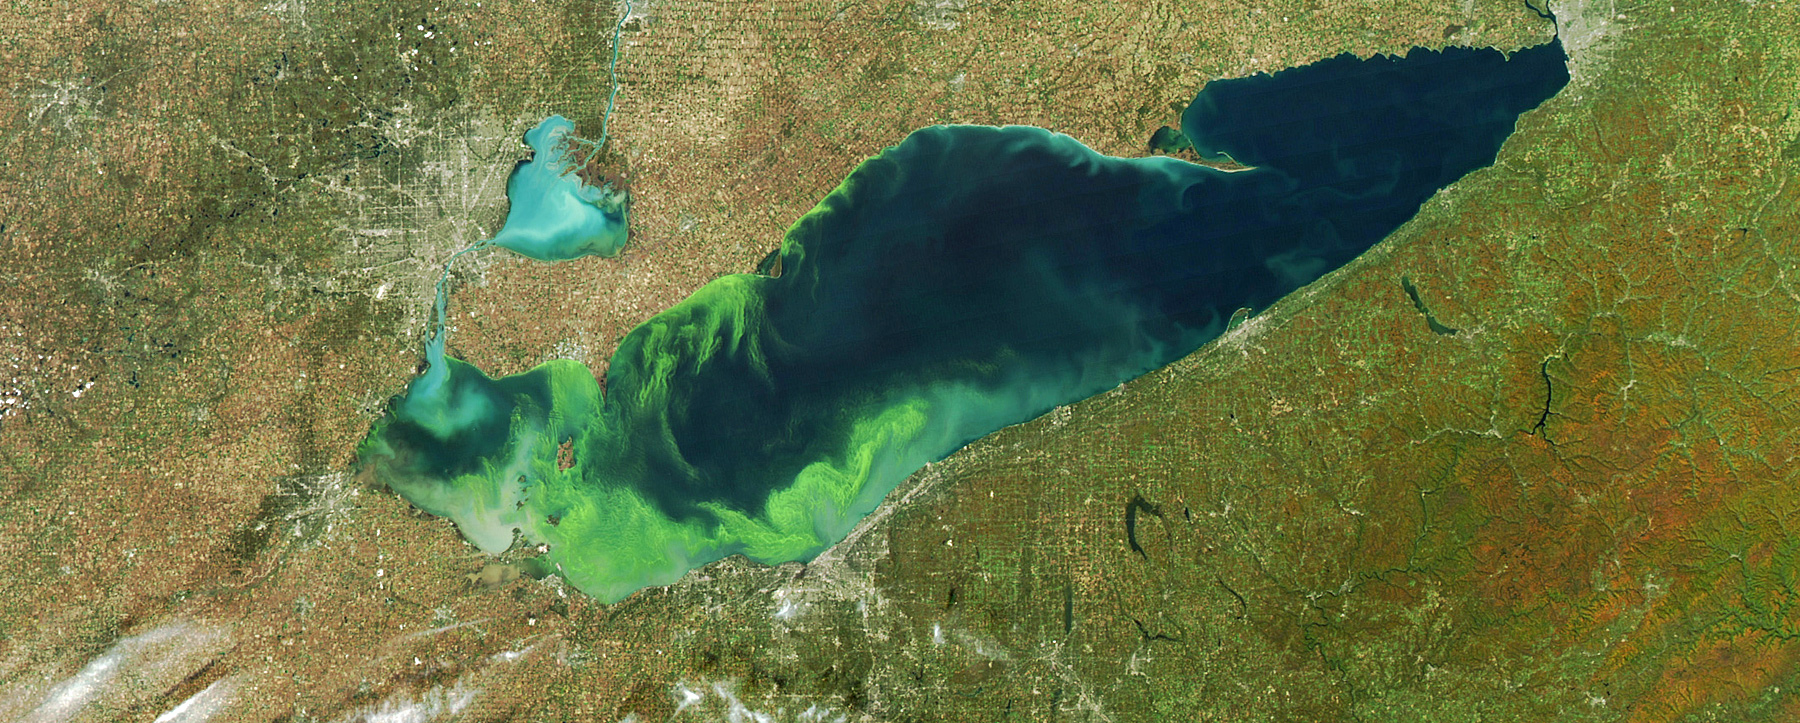 a satellite view of long body of water, lake erie, revealing unusual neon green waste flowing along the coastline. the green is an algae bloom propelled by phosphorous from fertilizer and waste